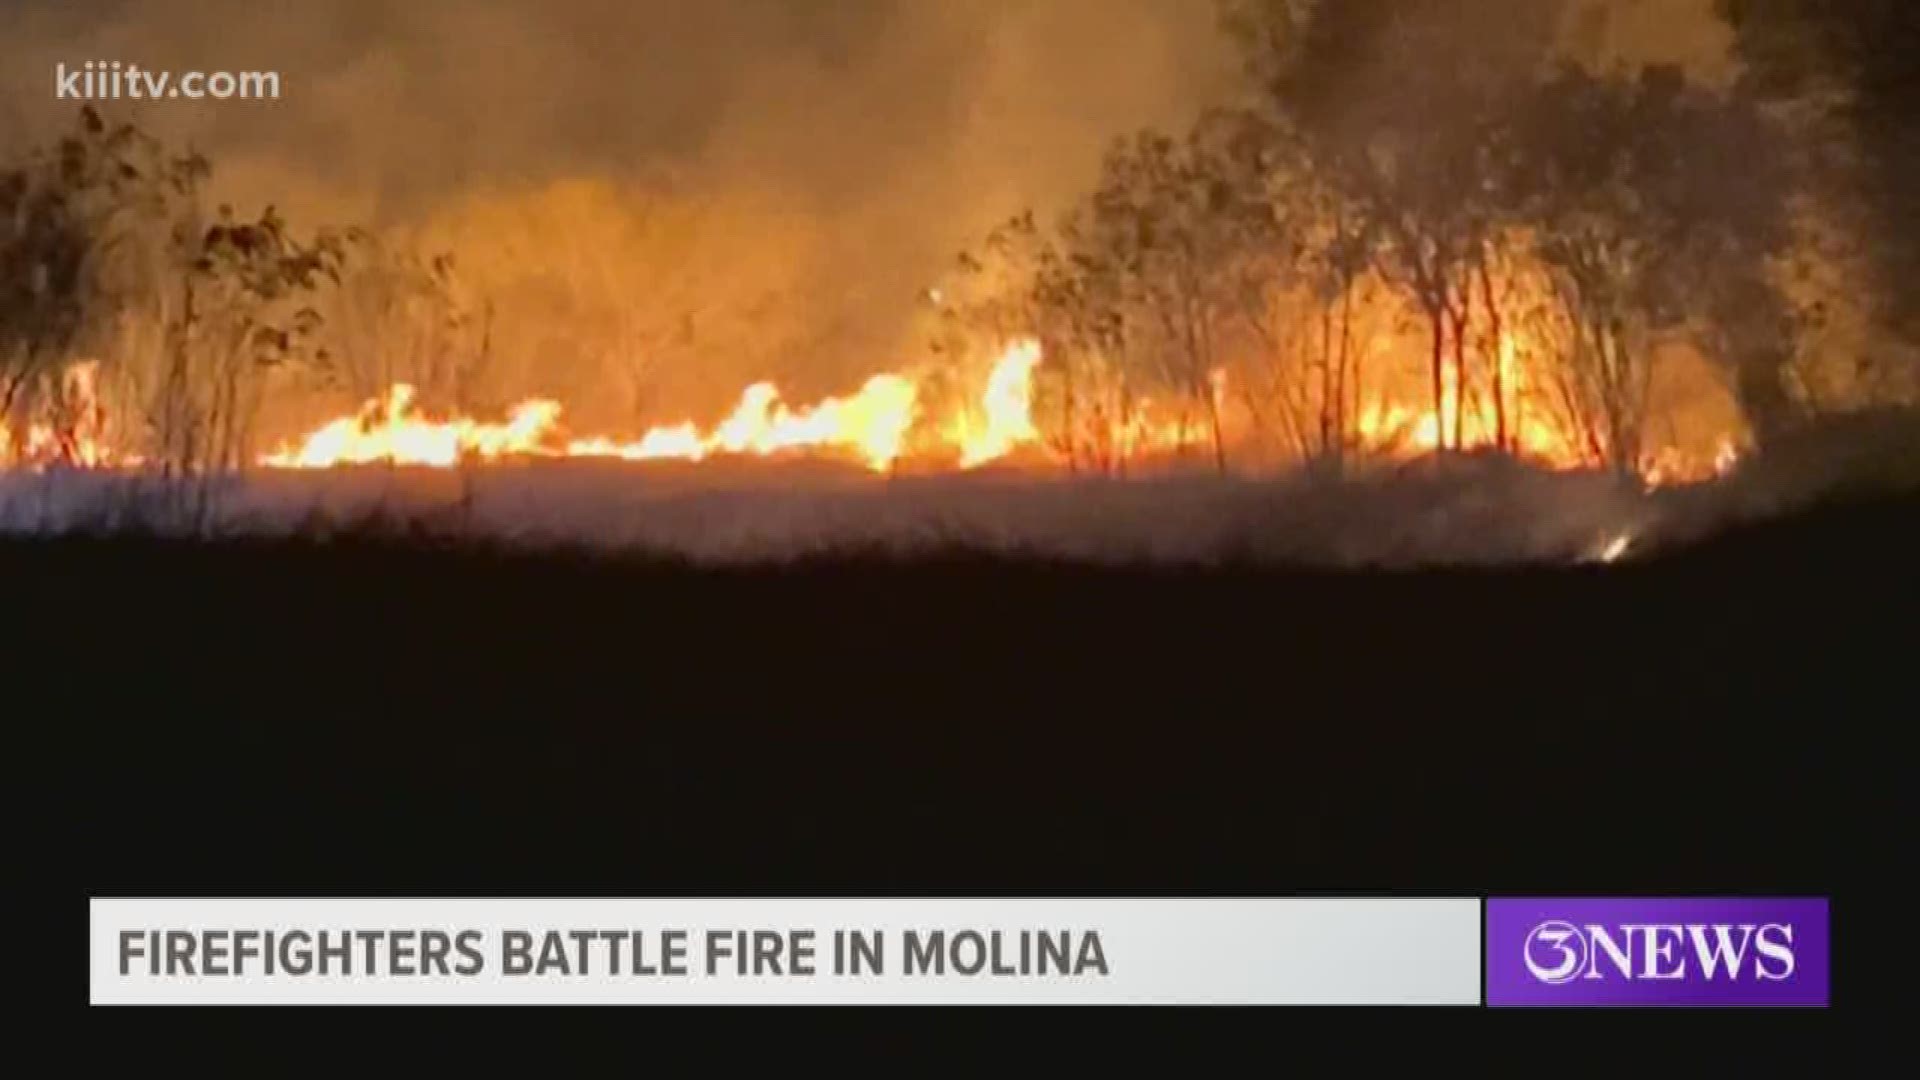 The Corpus Christi Fire Department had to battle a stubborn brush fire Tuesday night in the Molina neighborhood thanks to fireworks.